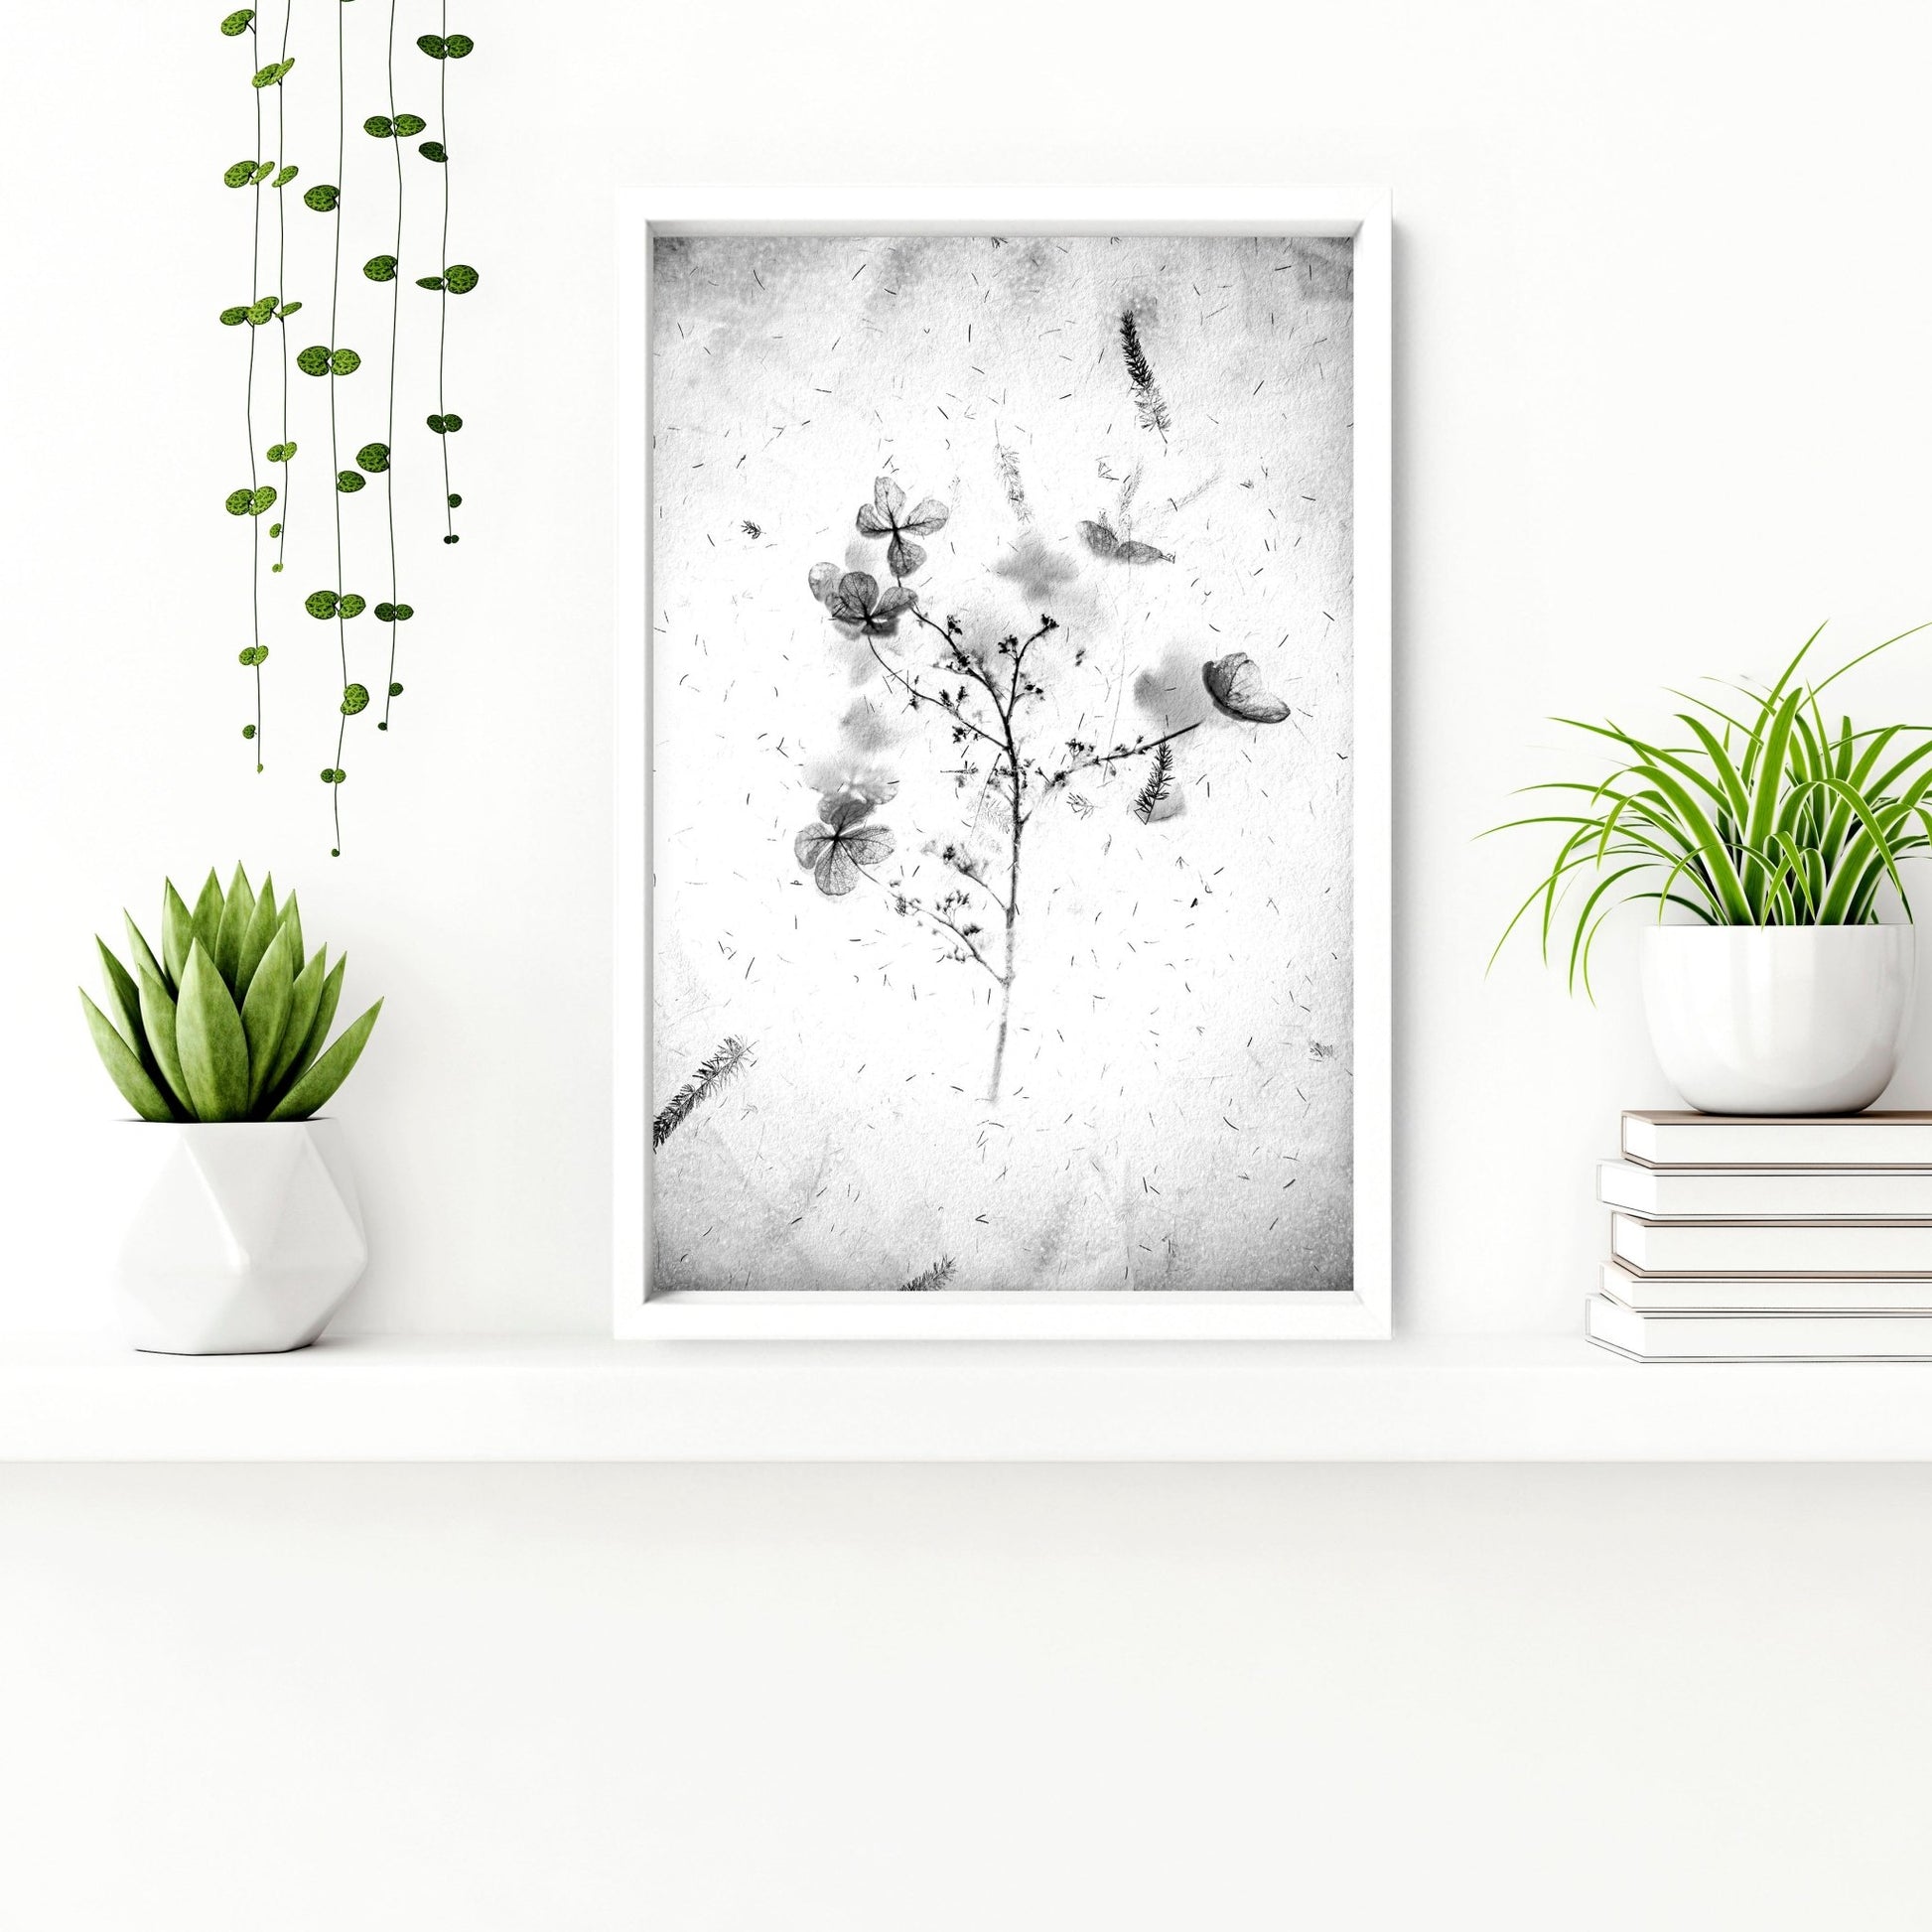 Prints for a bathroom | set of 3 wall art prints - About Wall Art